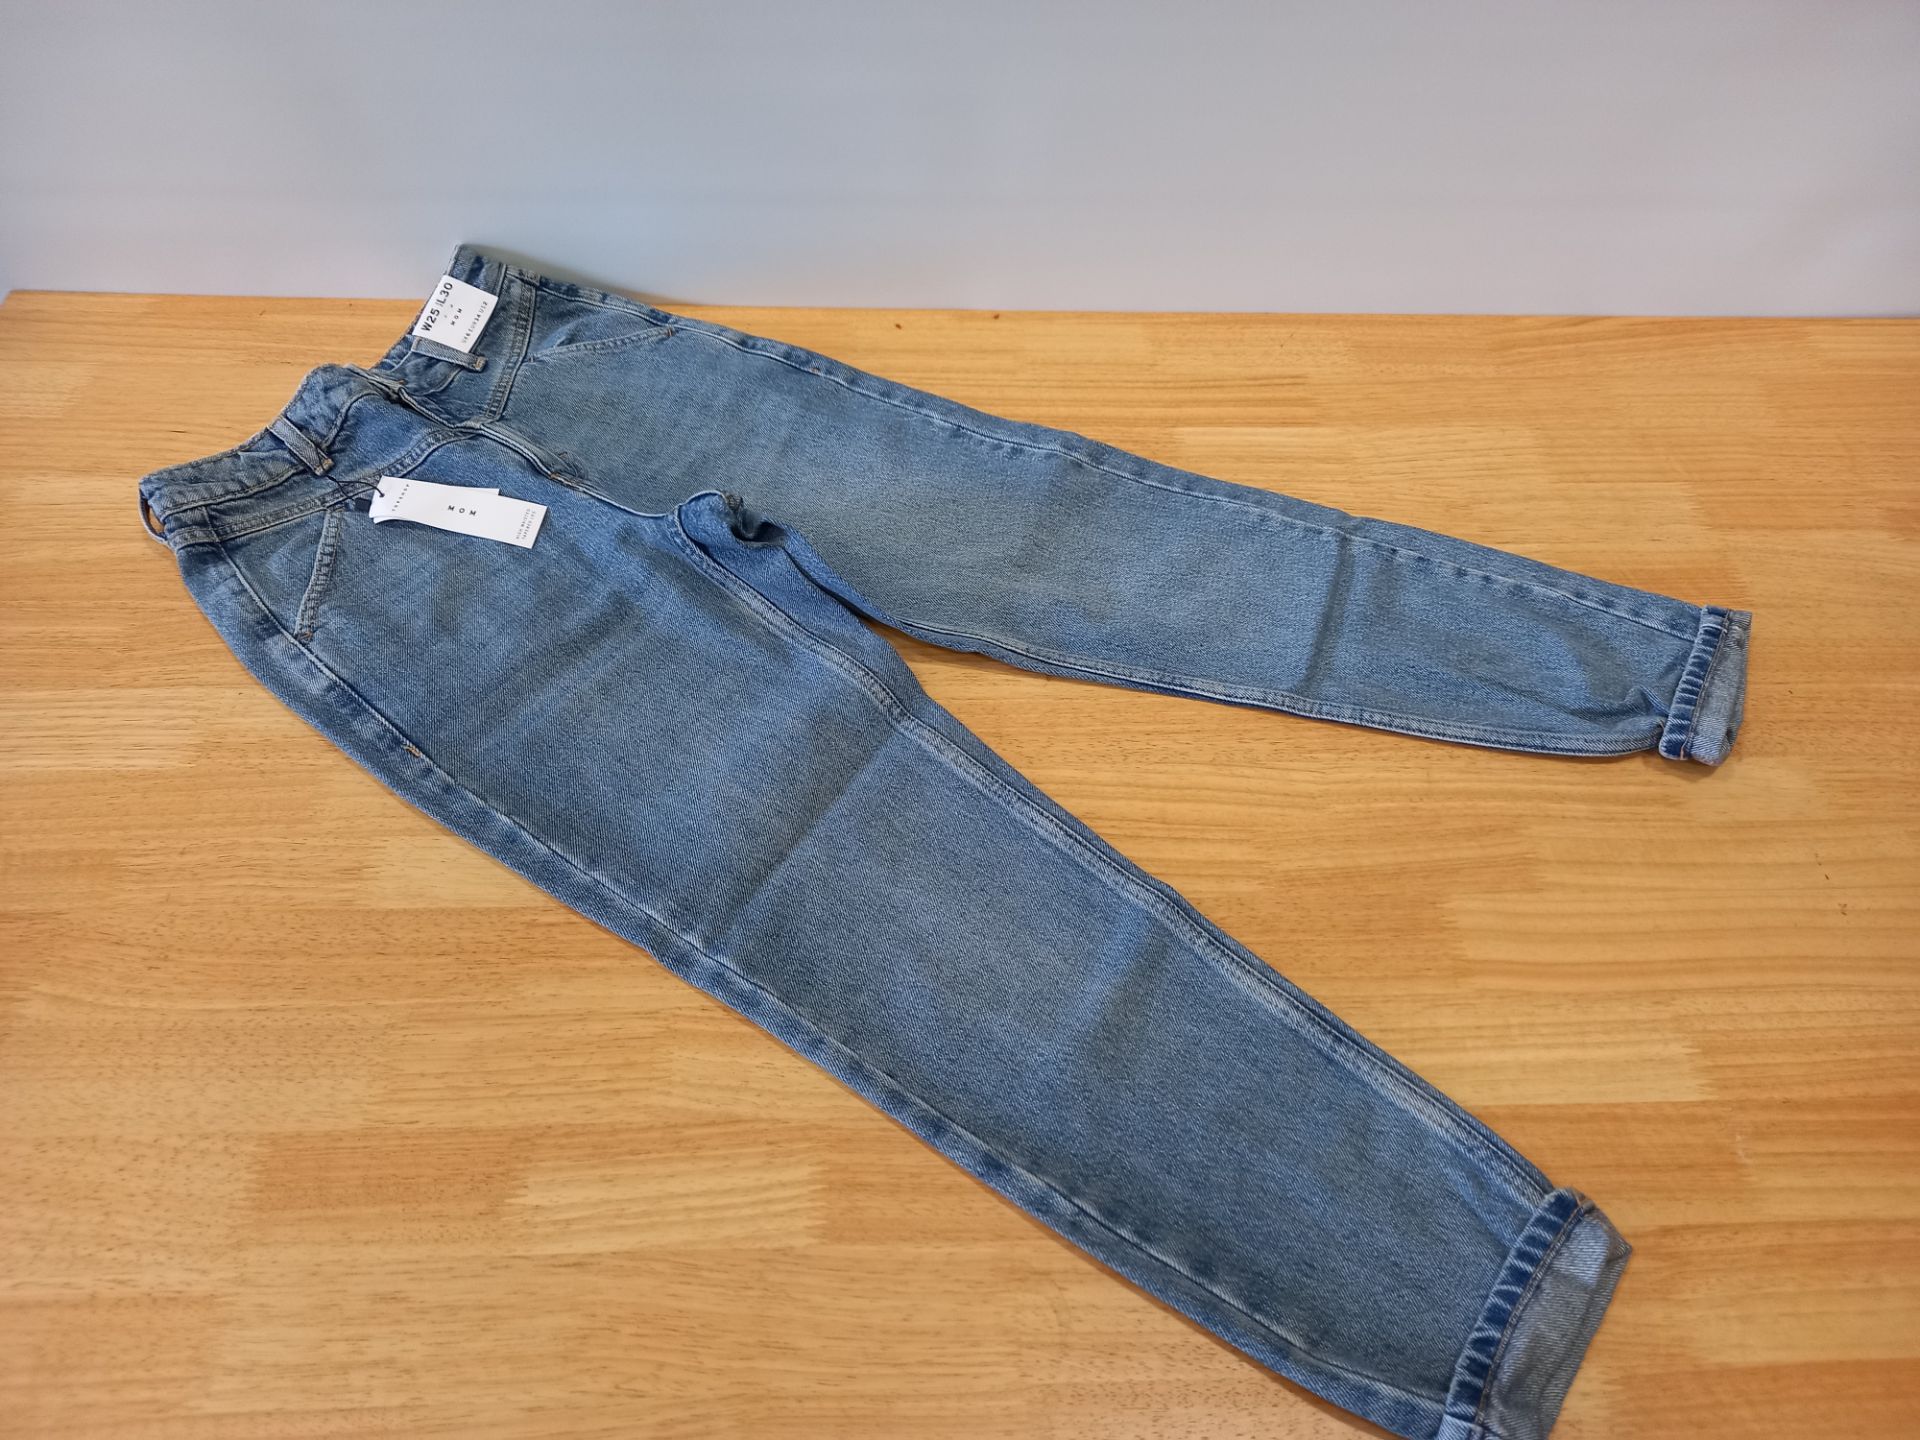 12 X BRAND NEW TOPSHOP MOM HIGH WAISTED TAPERED LEG JEANS UK SIZE 6 RRP £42.00 (TOTAL RRP £504.00)